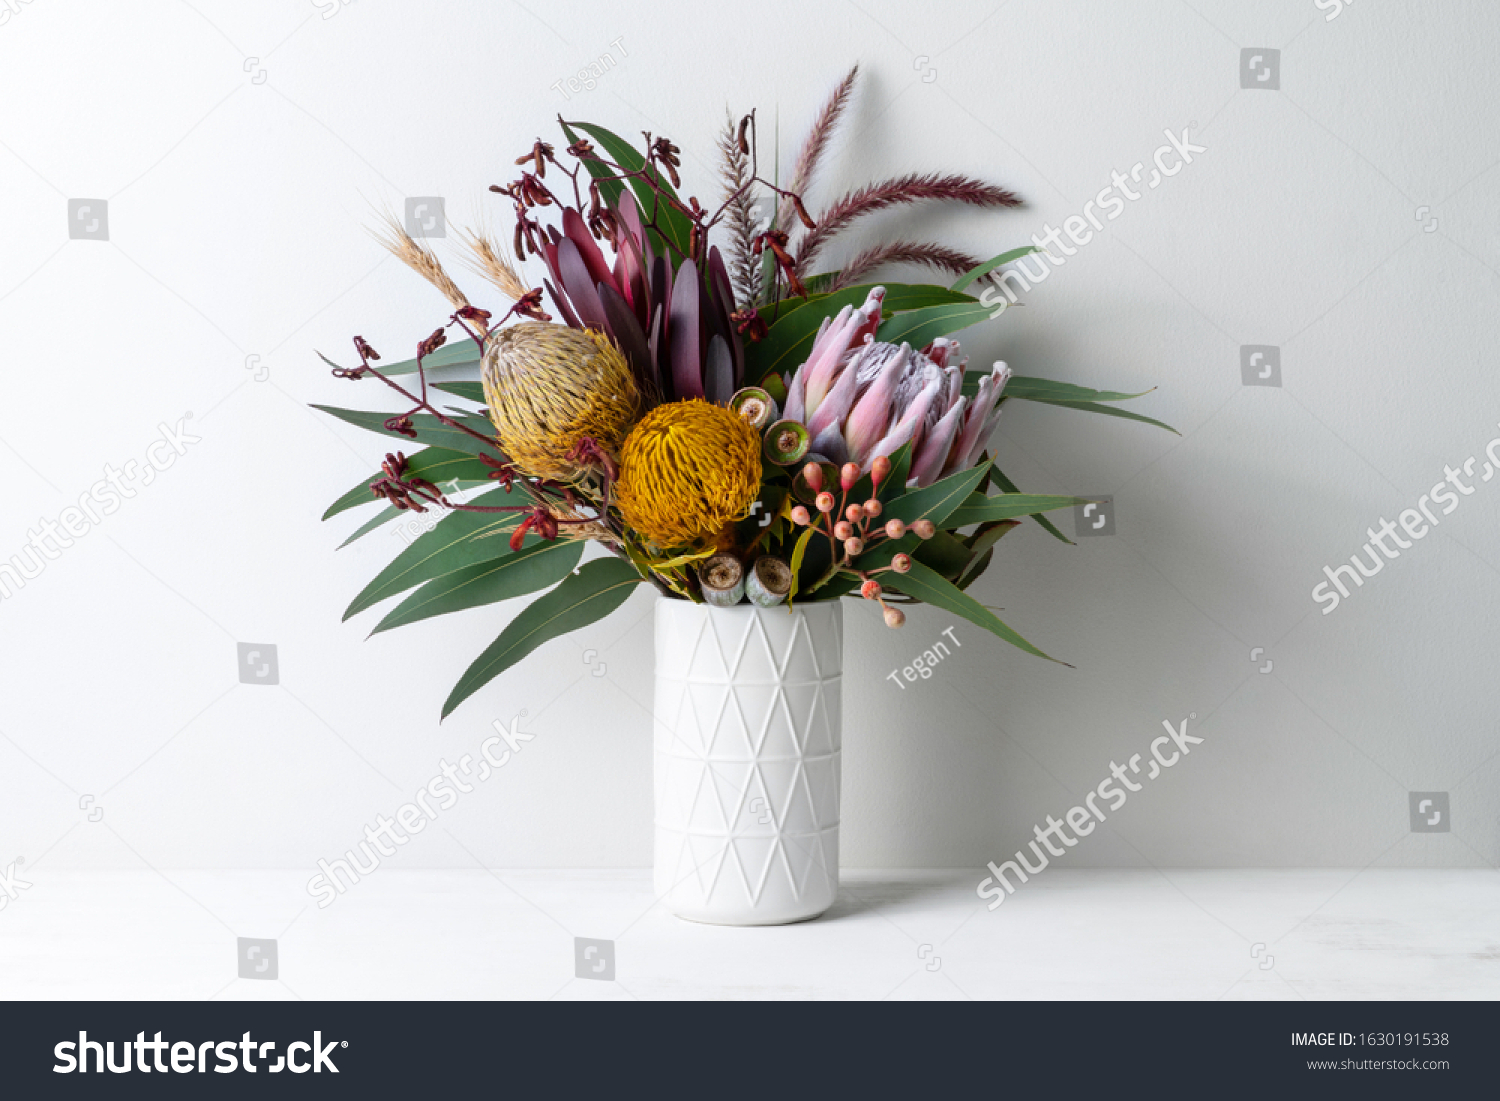 Beautiful floral arrangement of mostly Australian native flowers, including protea, banksia, kangaroo paw, eucalyptus leaves and gum nuts, in a white vase on a white table with a white background. #1630191538